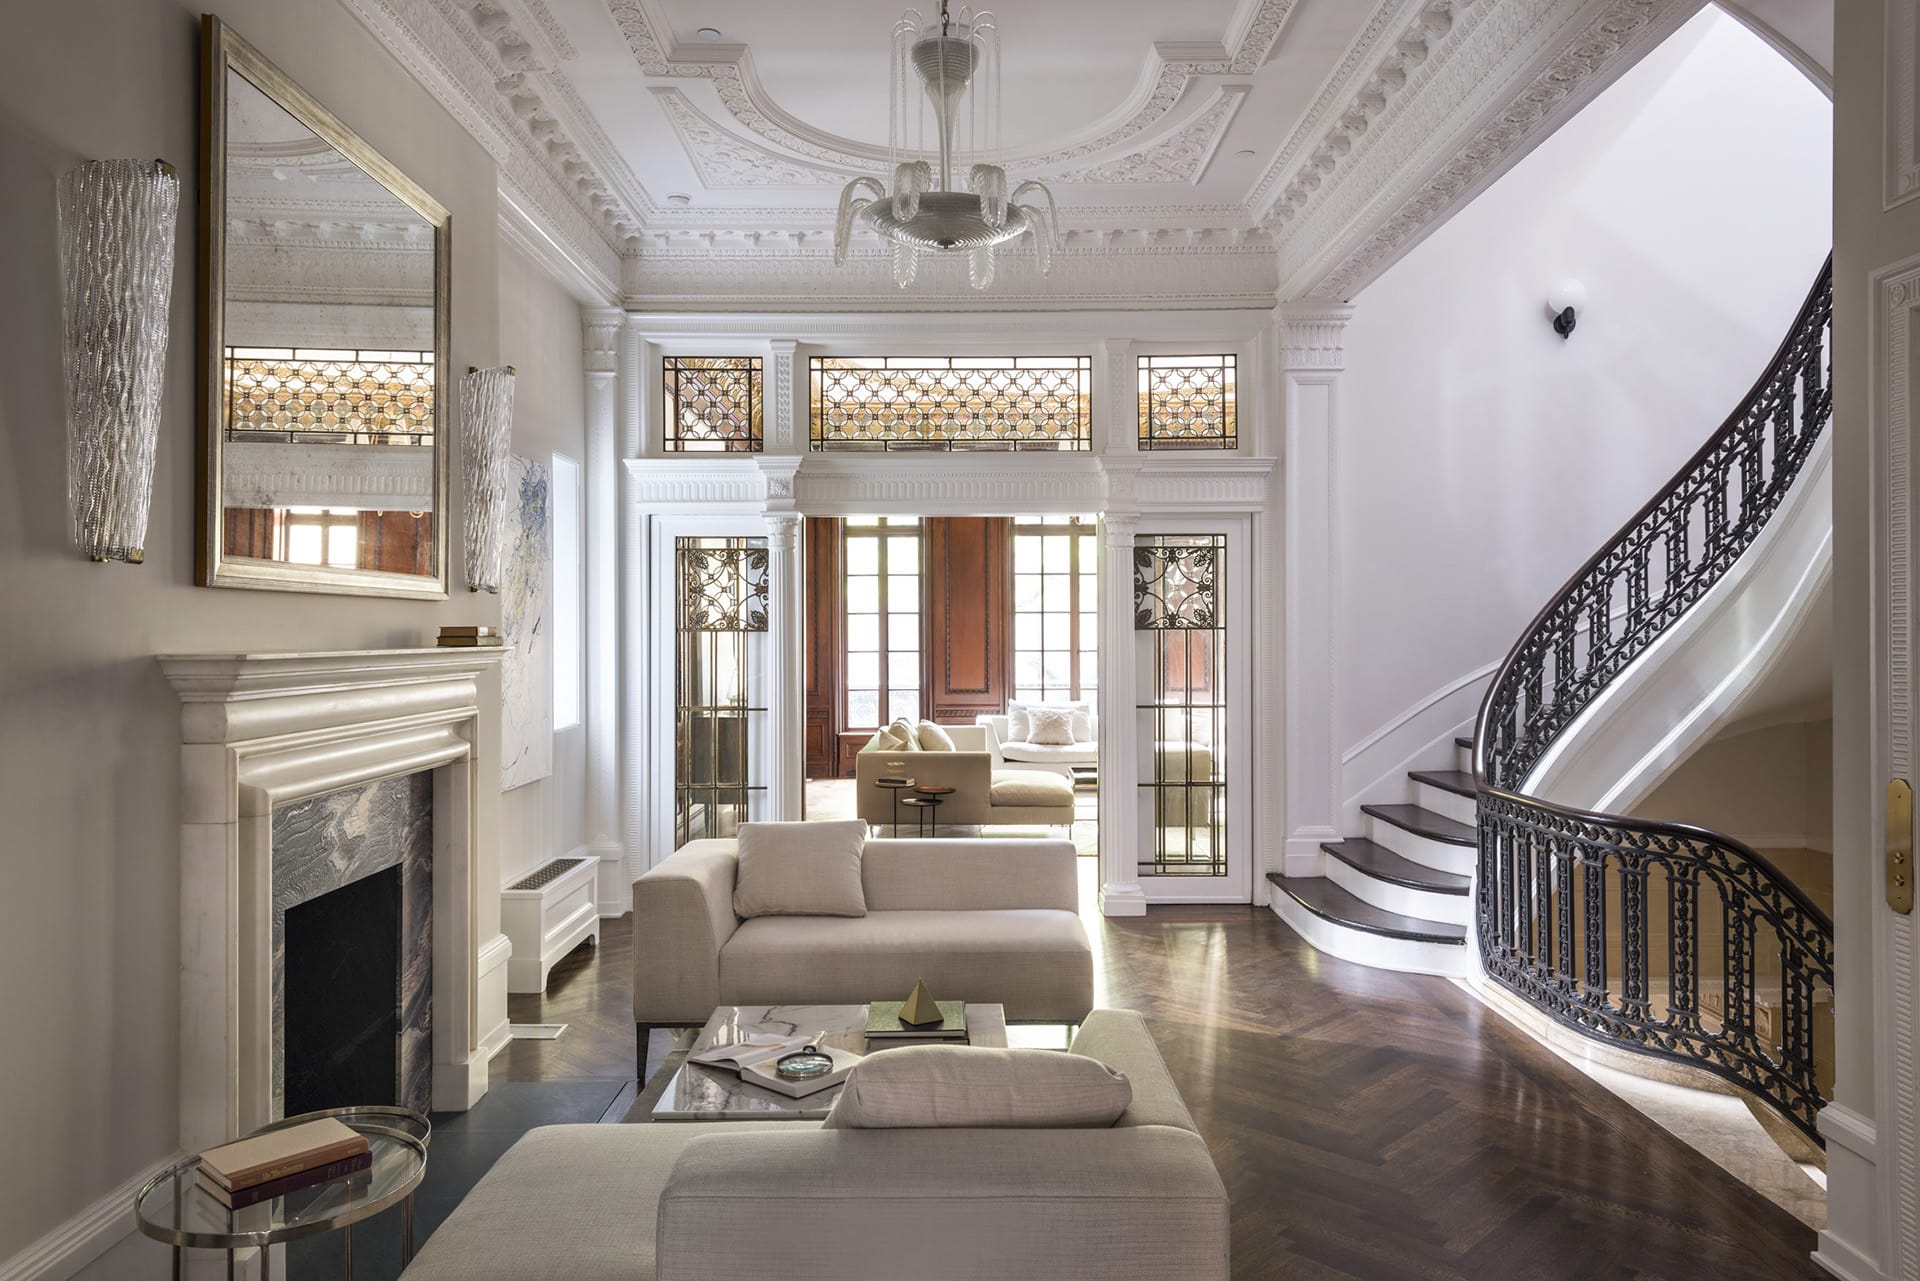 Second-floor landing with a sitting area, intricate detailing on the staircase, ceiling, doors, and moldings, and contemporary furnishings.